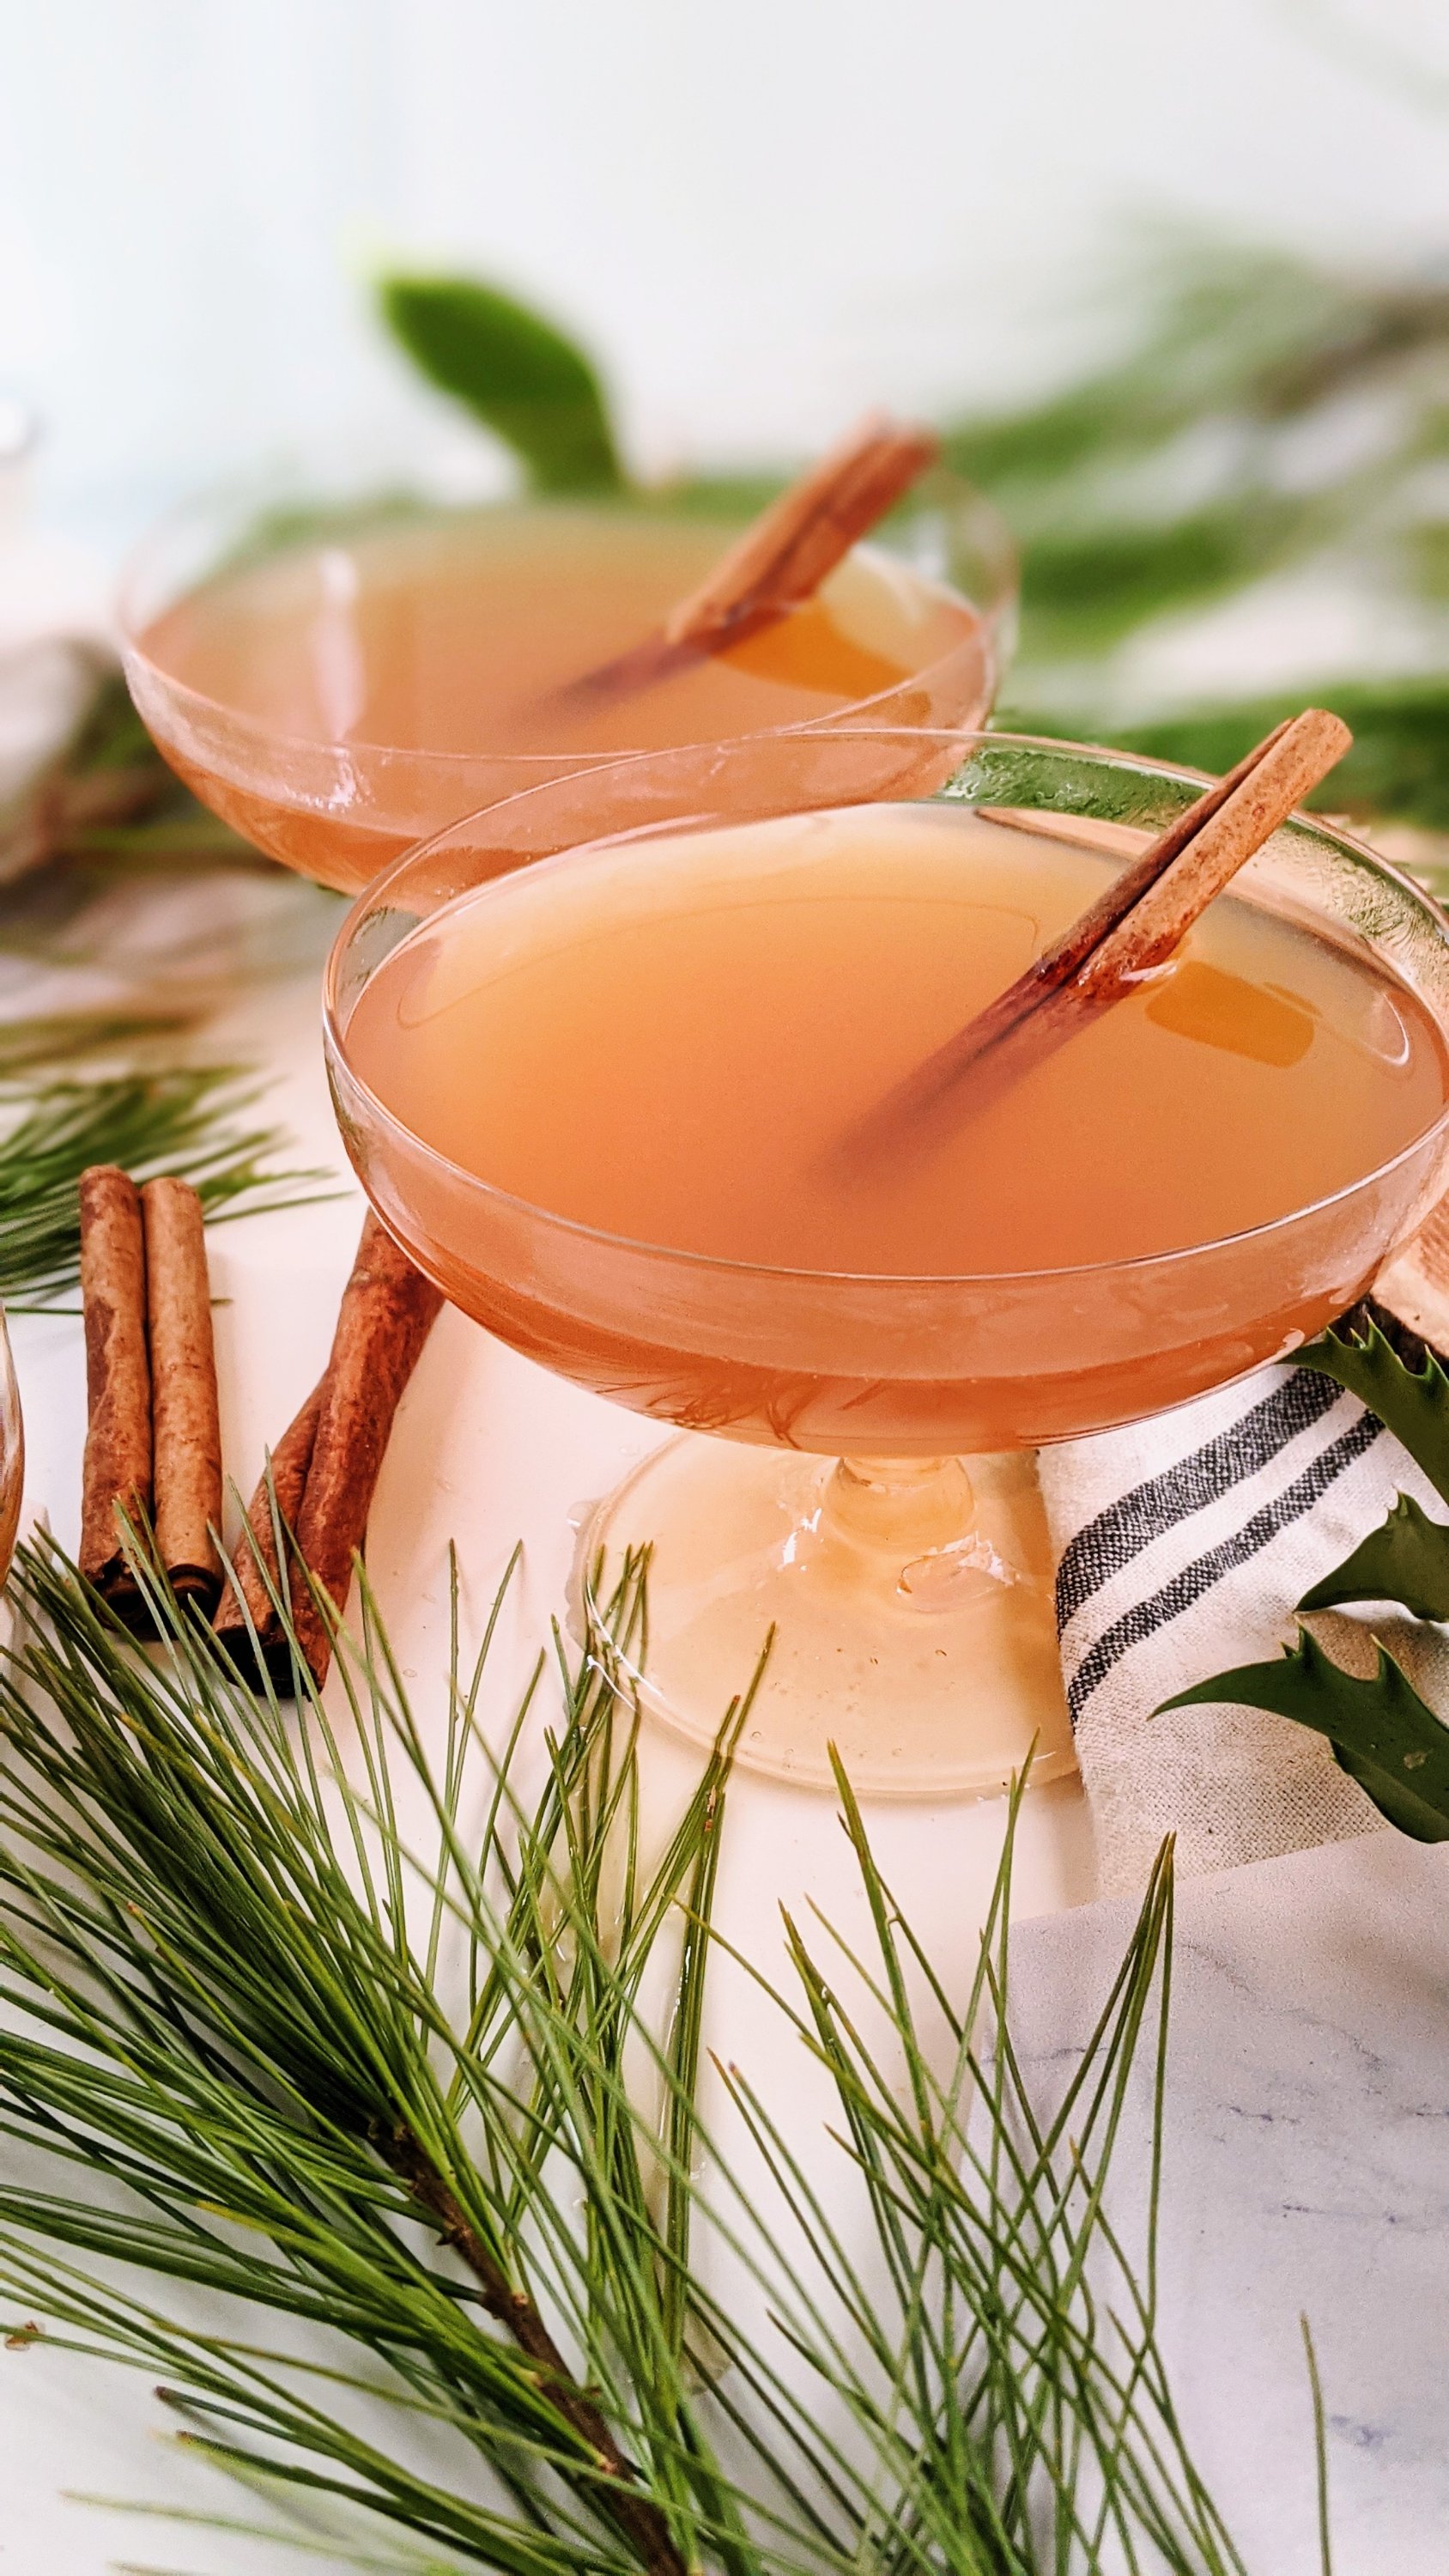 crowd pleaser warm holiday drinks hot cocktails with apple cider cinnamon spiced spiked cider leftover cider recipes what to make with drinks with apple pie moonshine